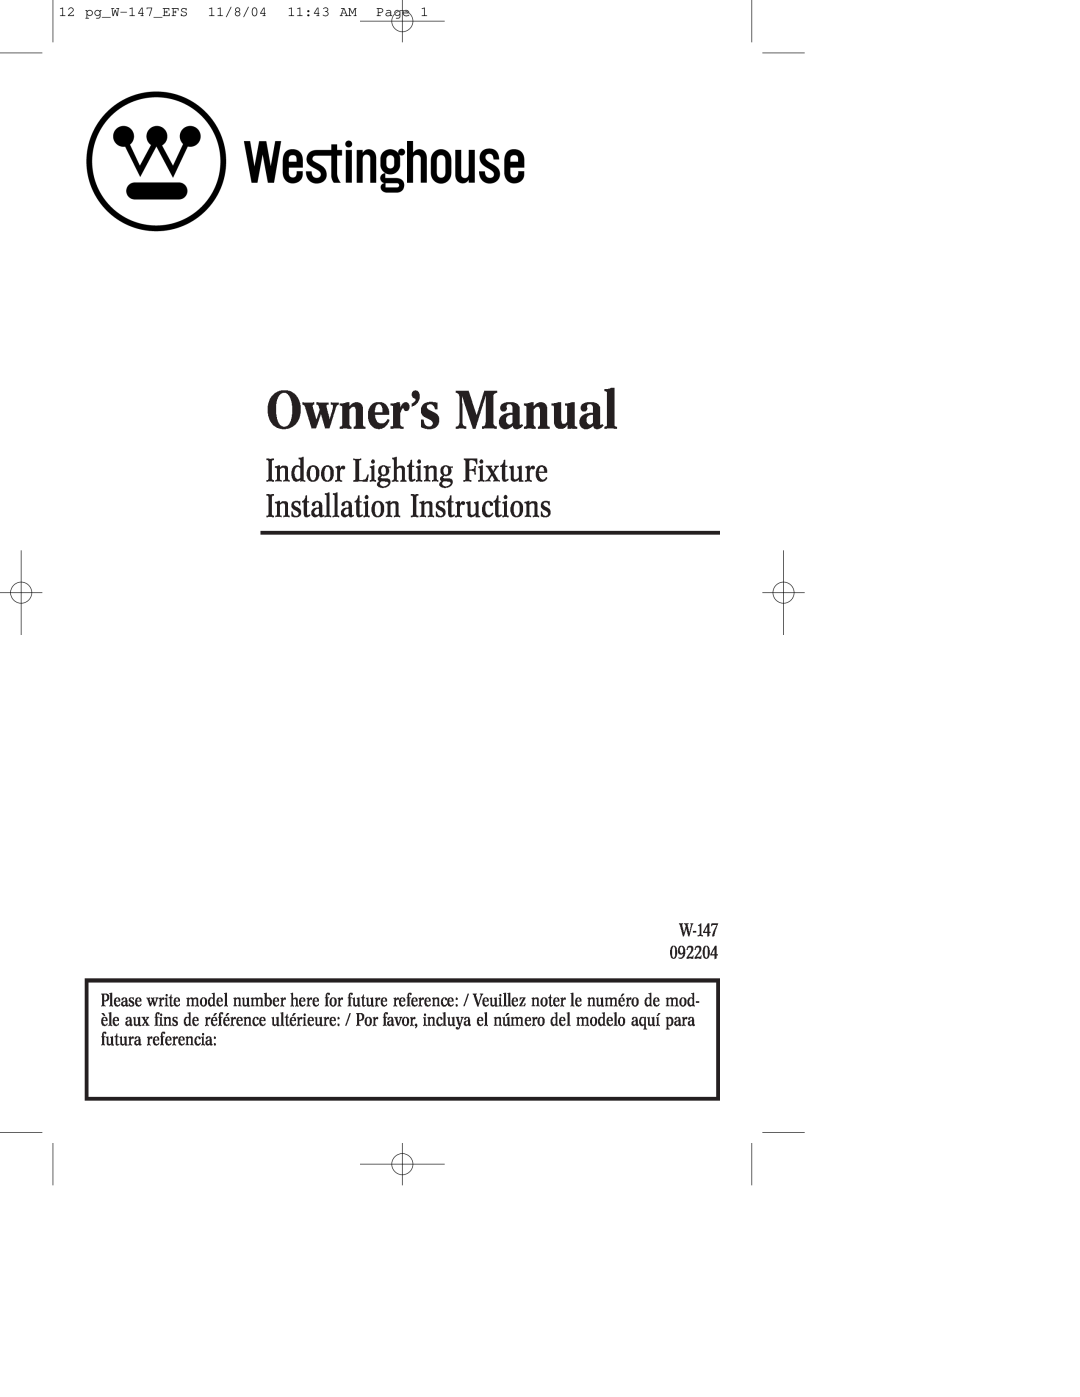 Westinghouse W-147 owner manual Indoor Lighting Fixture Installation Instructions 